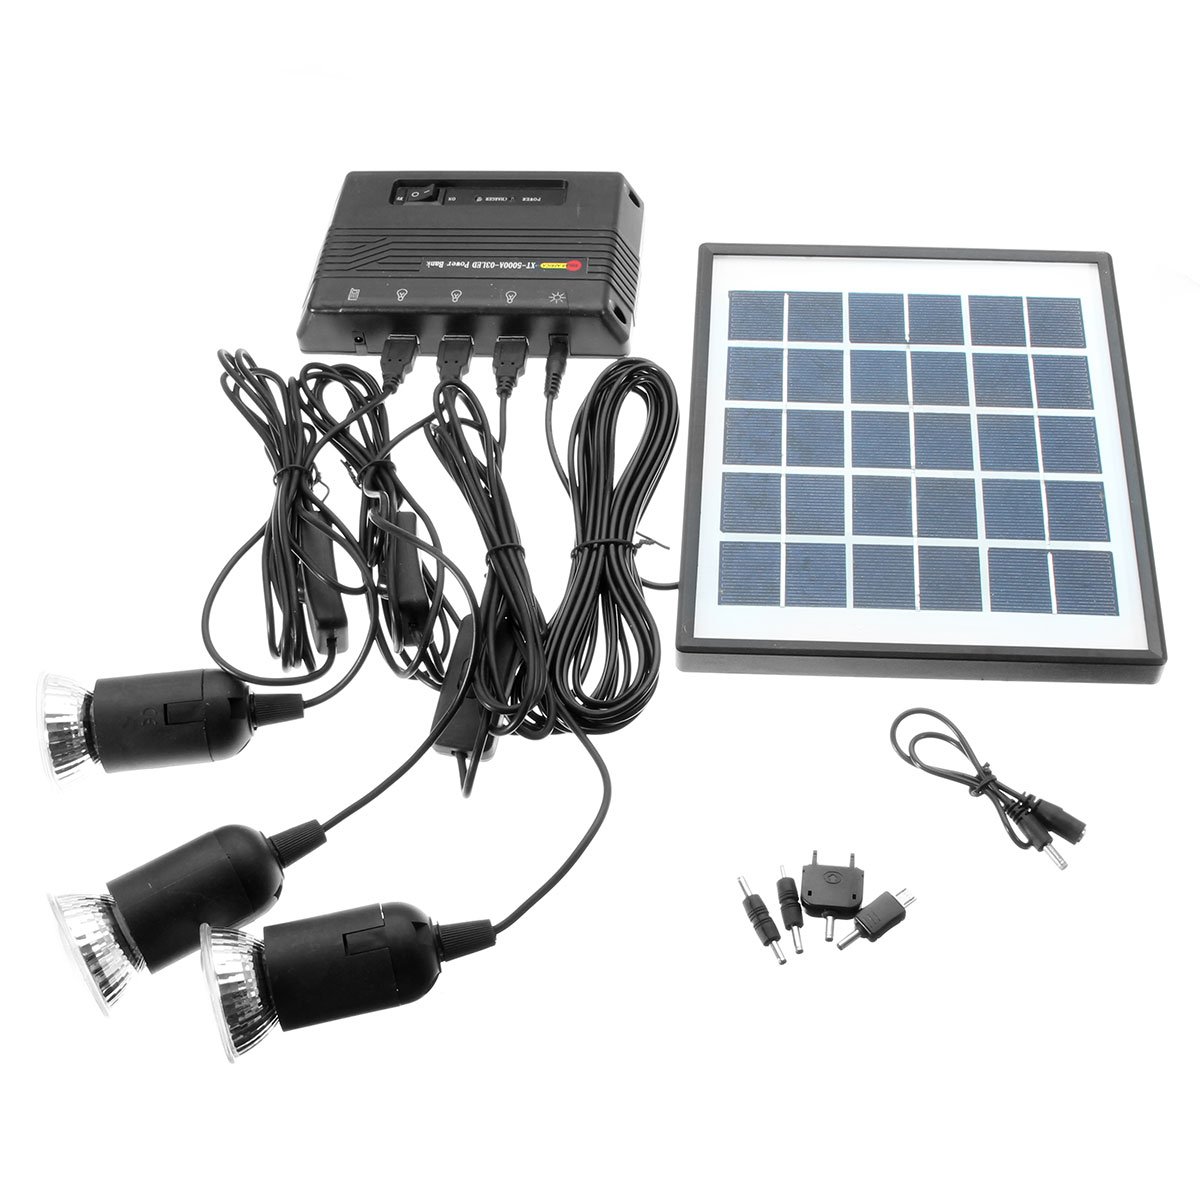 6V 4W DIY Outdoor Solar Panel With Power Bank + 3*3.7V 1W LED Lamp For USB Charging 1